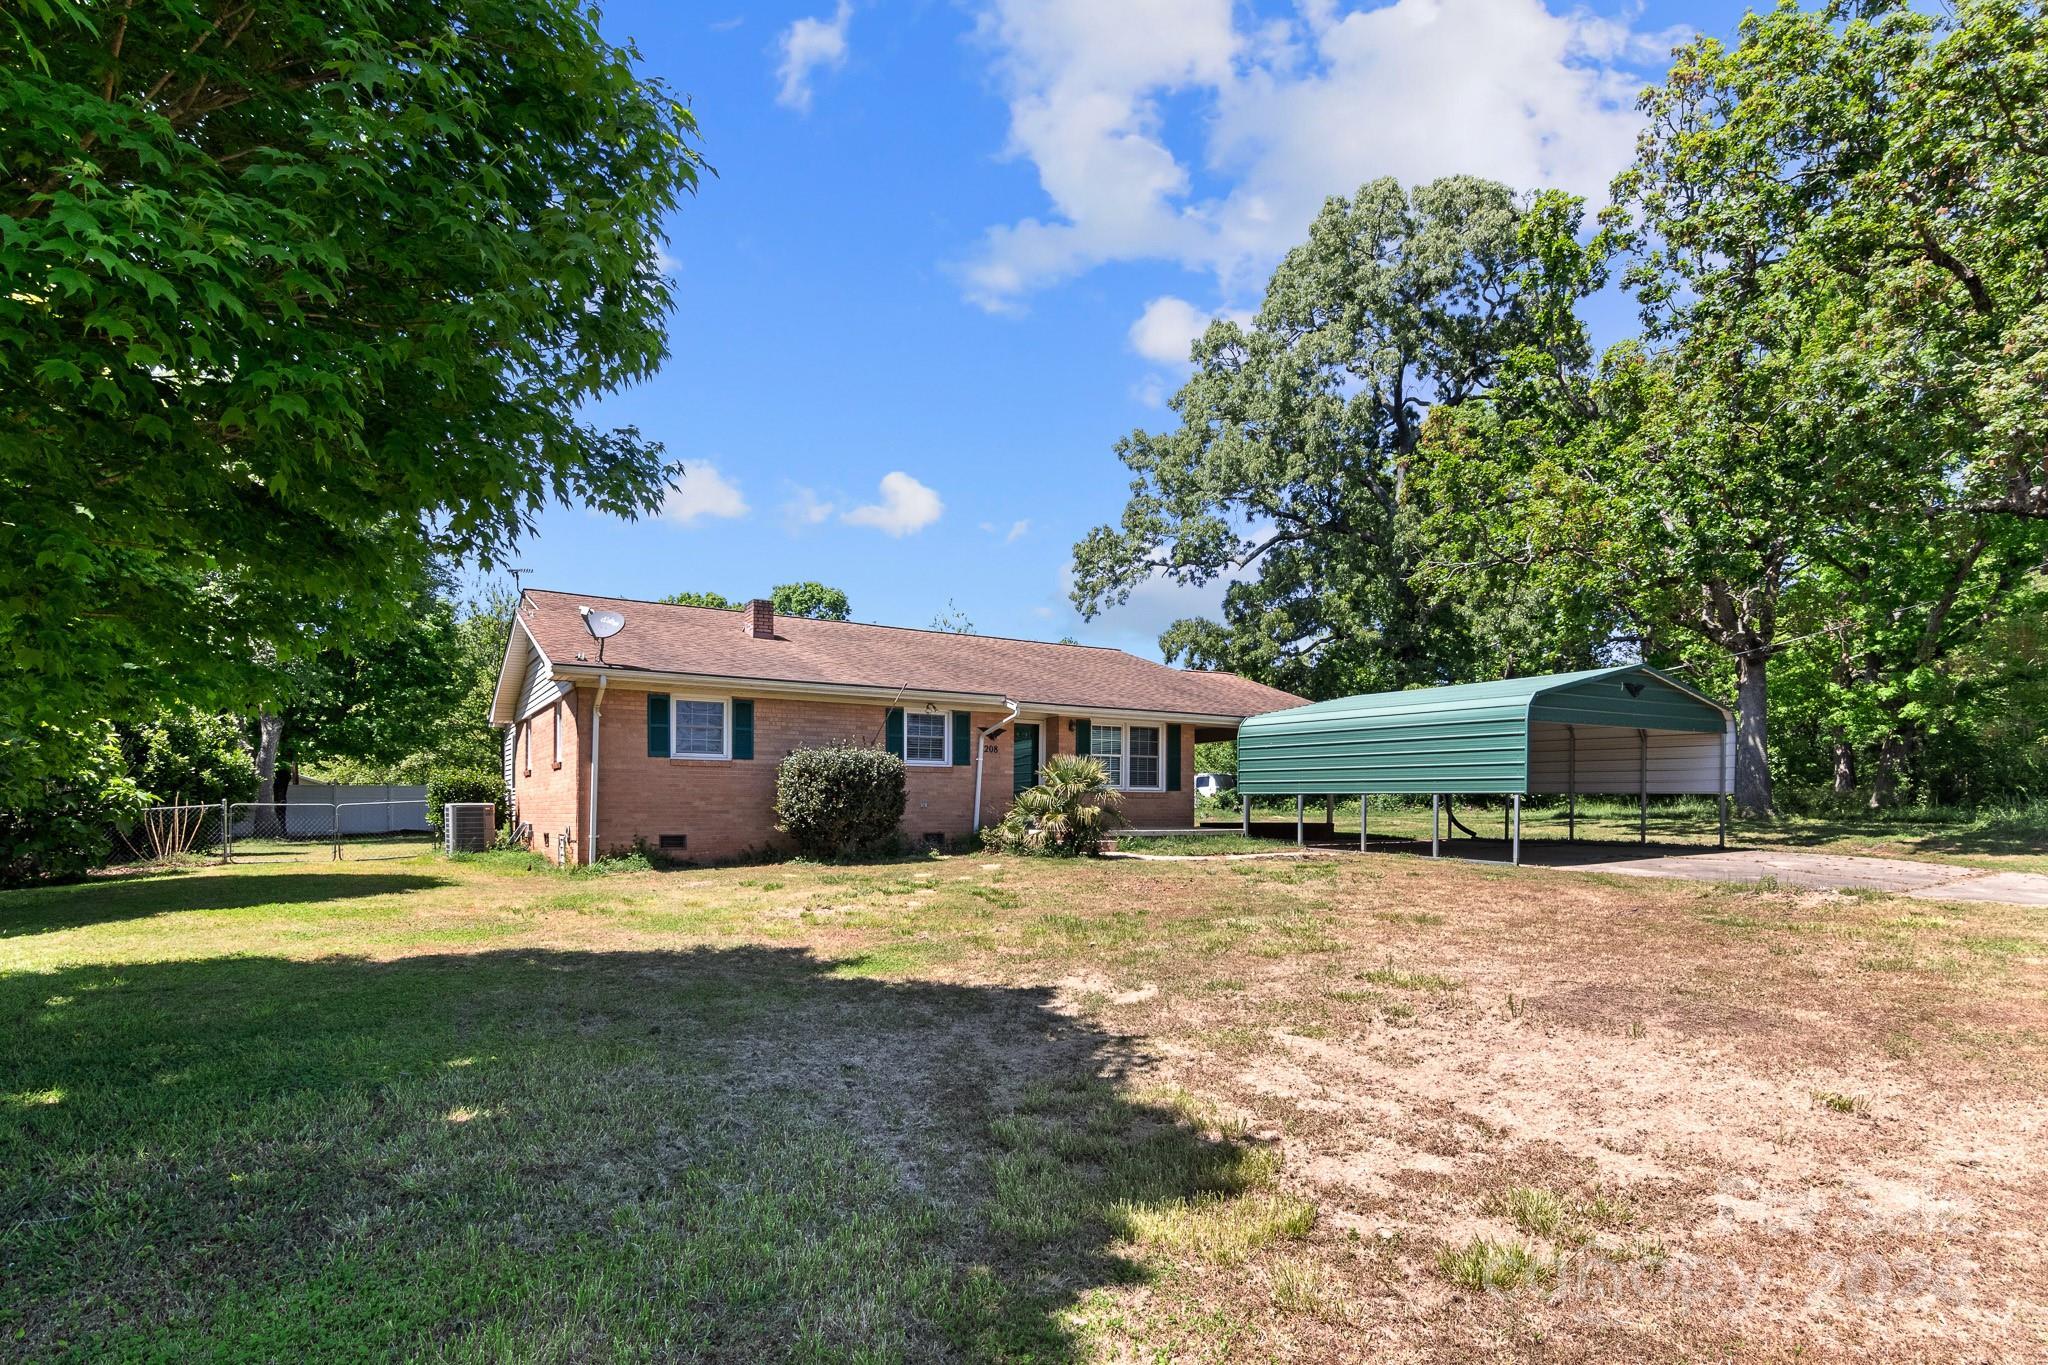 Photo one of 208 Caleb Rd Shelby NC 28152 | MLS 4132588